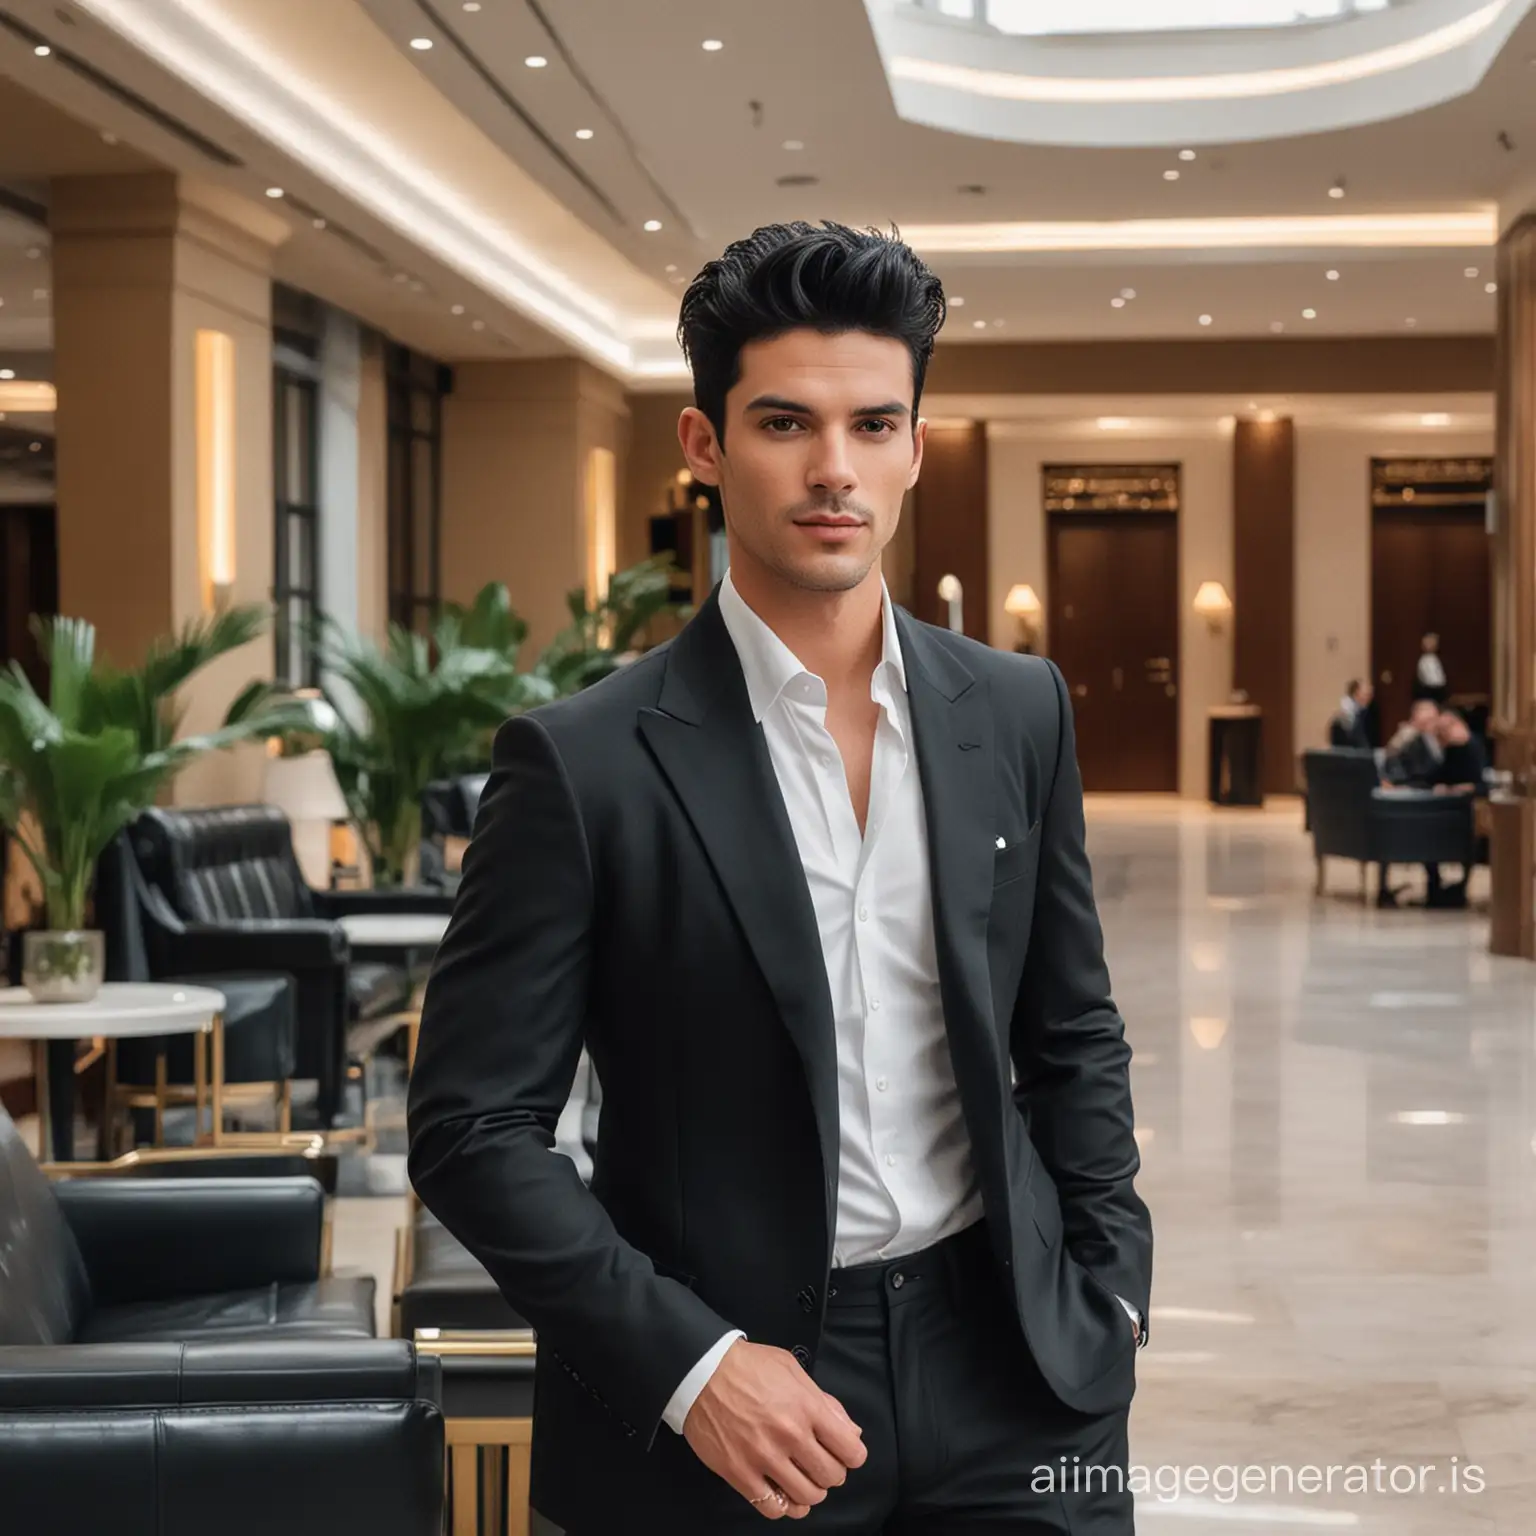 Stylish-Man-with-Black-Hair-in-Luxurious-Hotel-Lobby